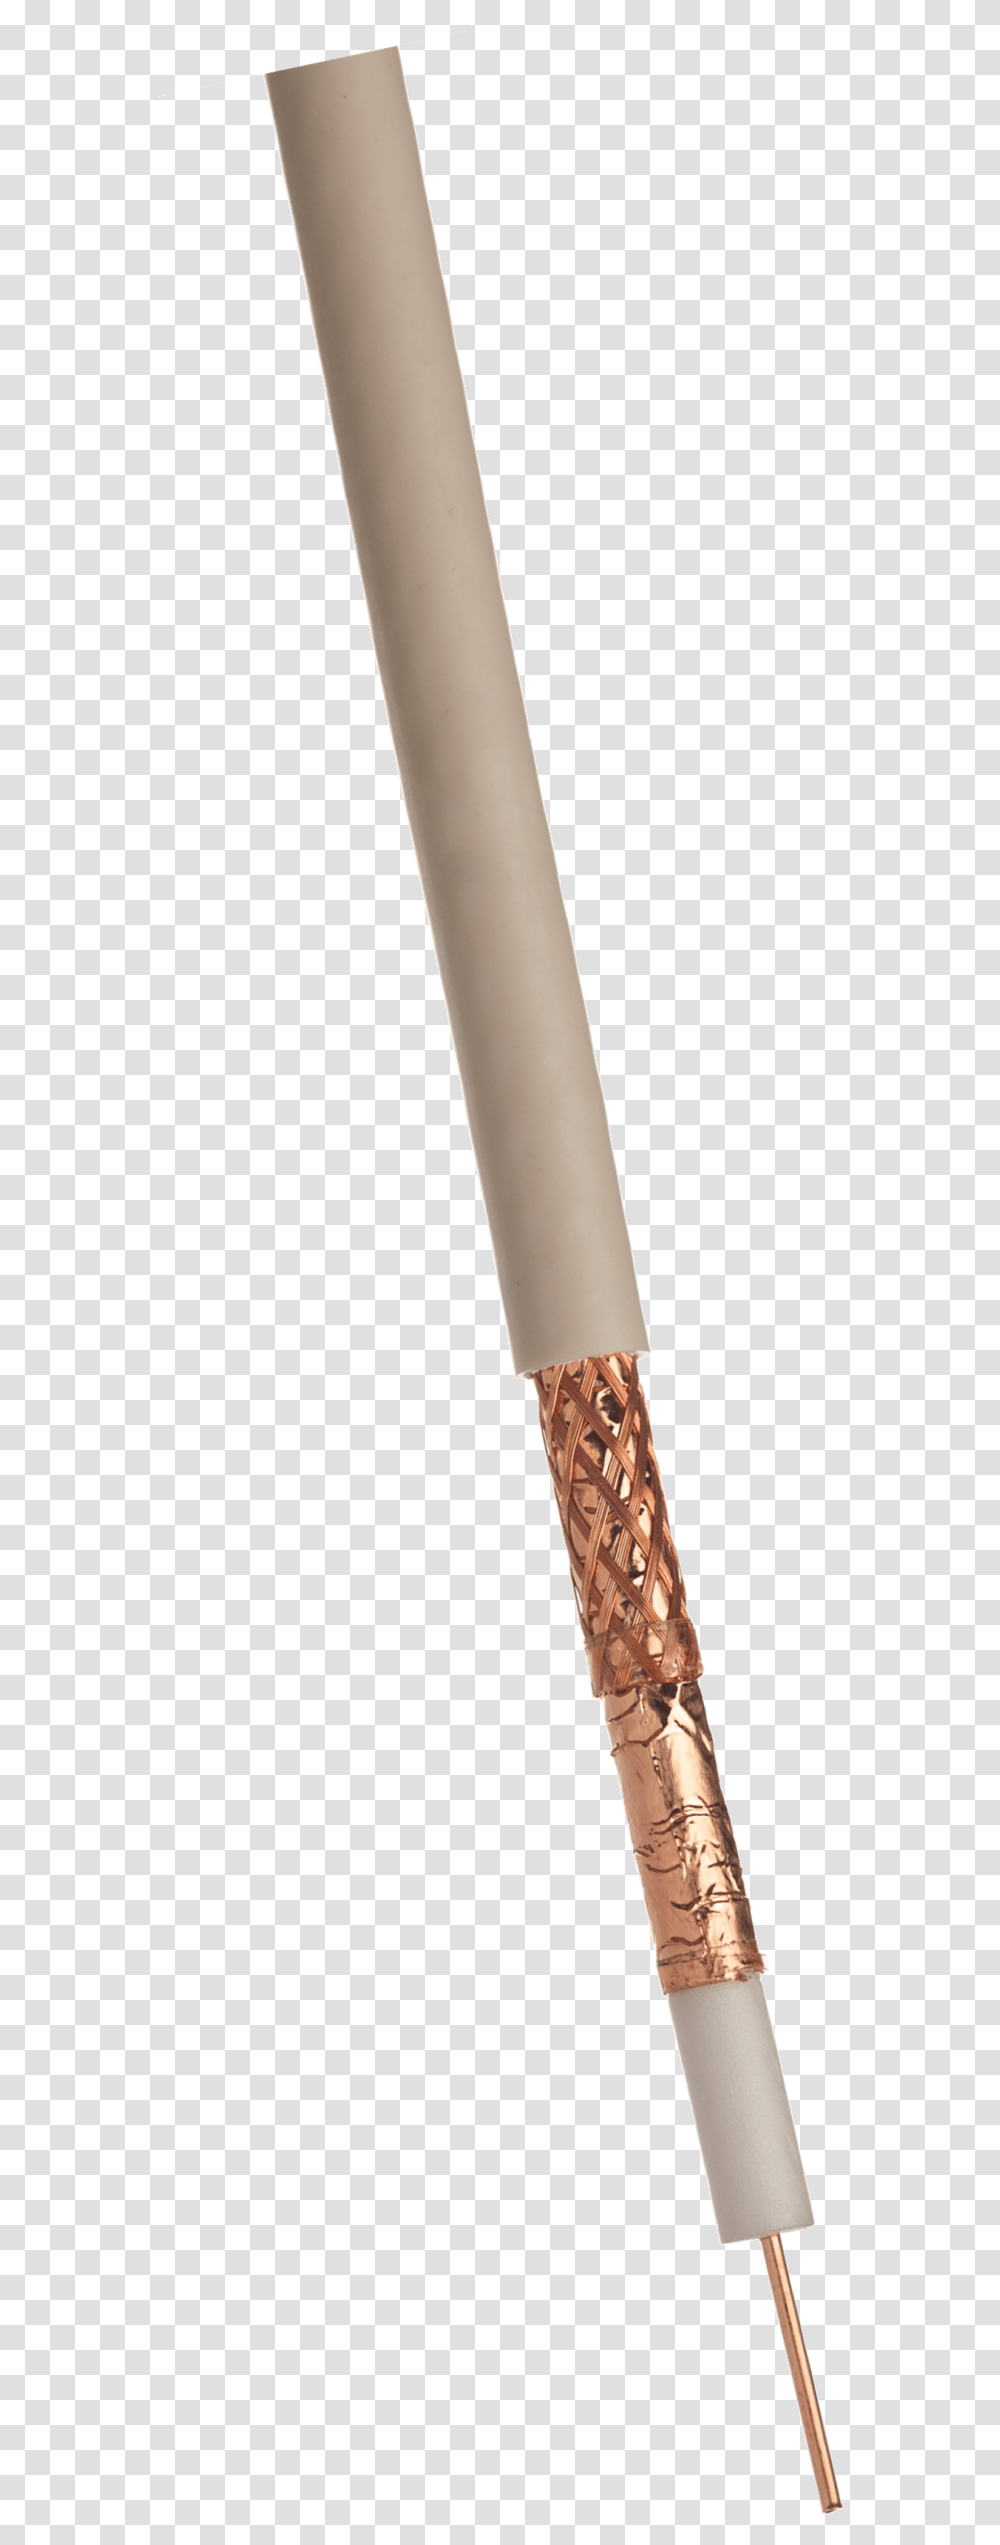 Coaxial Cable, Weapon, Weaponry, Blade, Sword Transparent Png